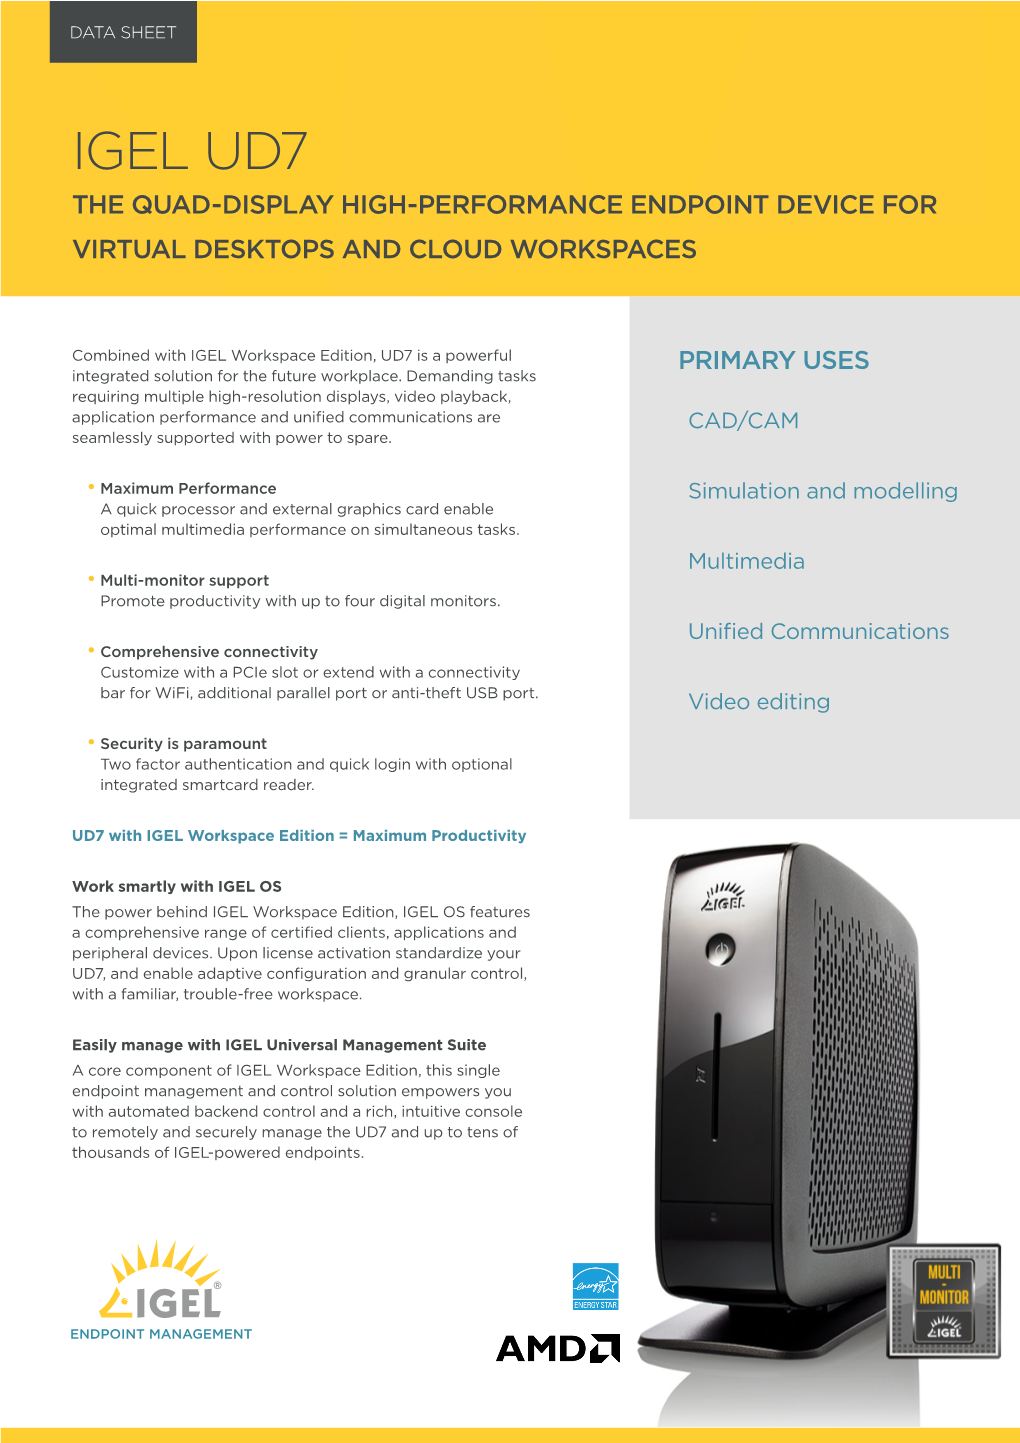 Igel Ud7 the Quad-Display High-Performance Endpoint Device for Virtual Desktops and Cloud Workspaces